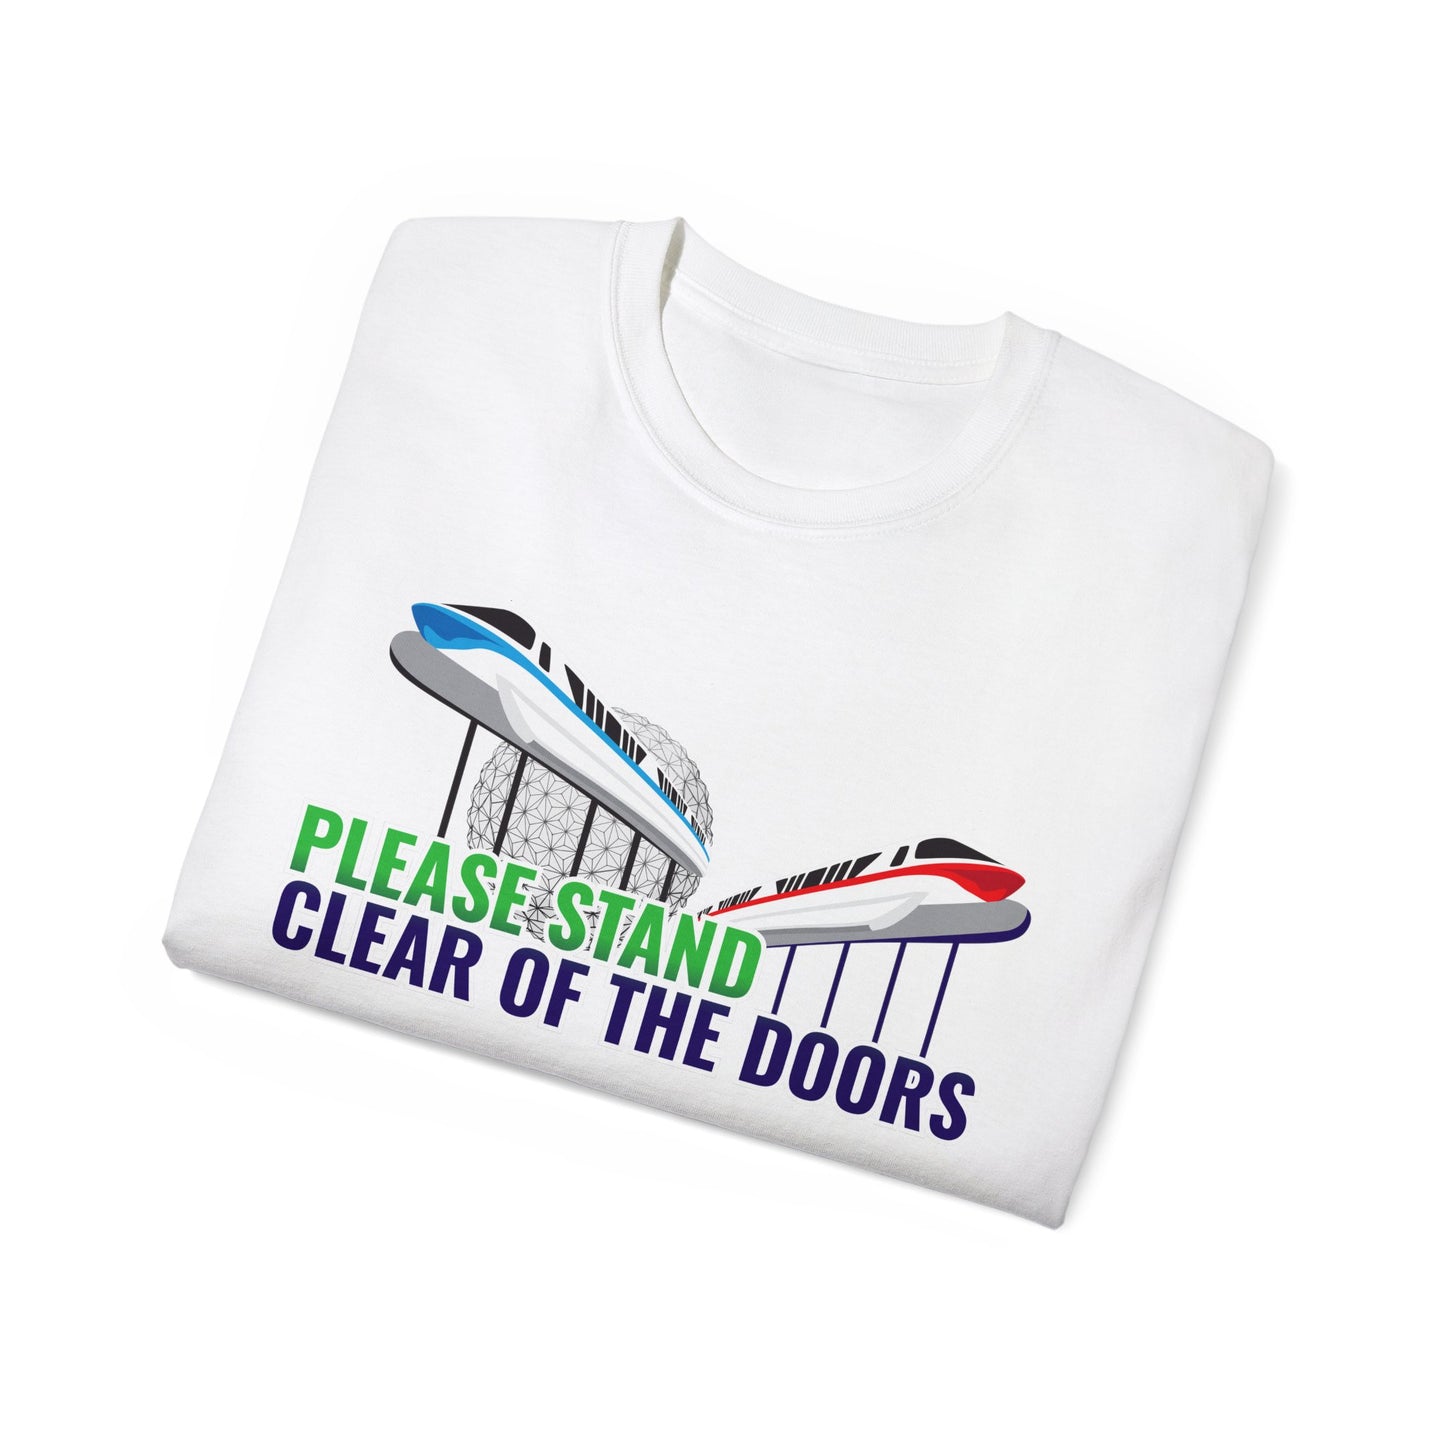 Please Stand Clear Of The Doors Unisex Graphic Tee